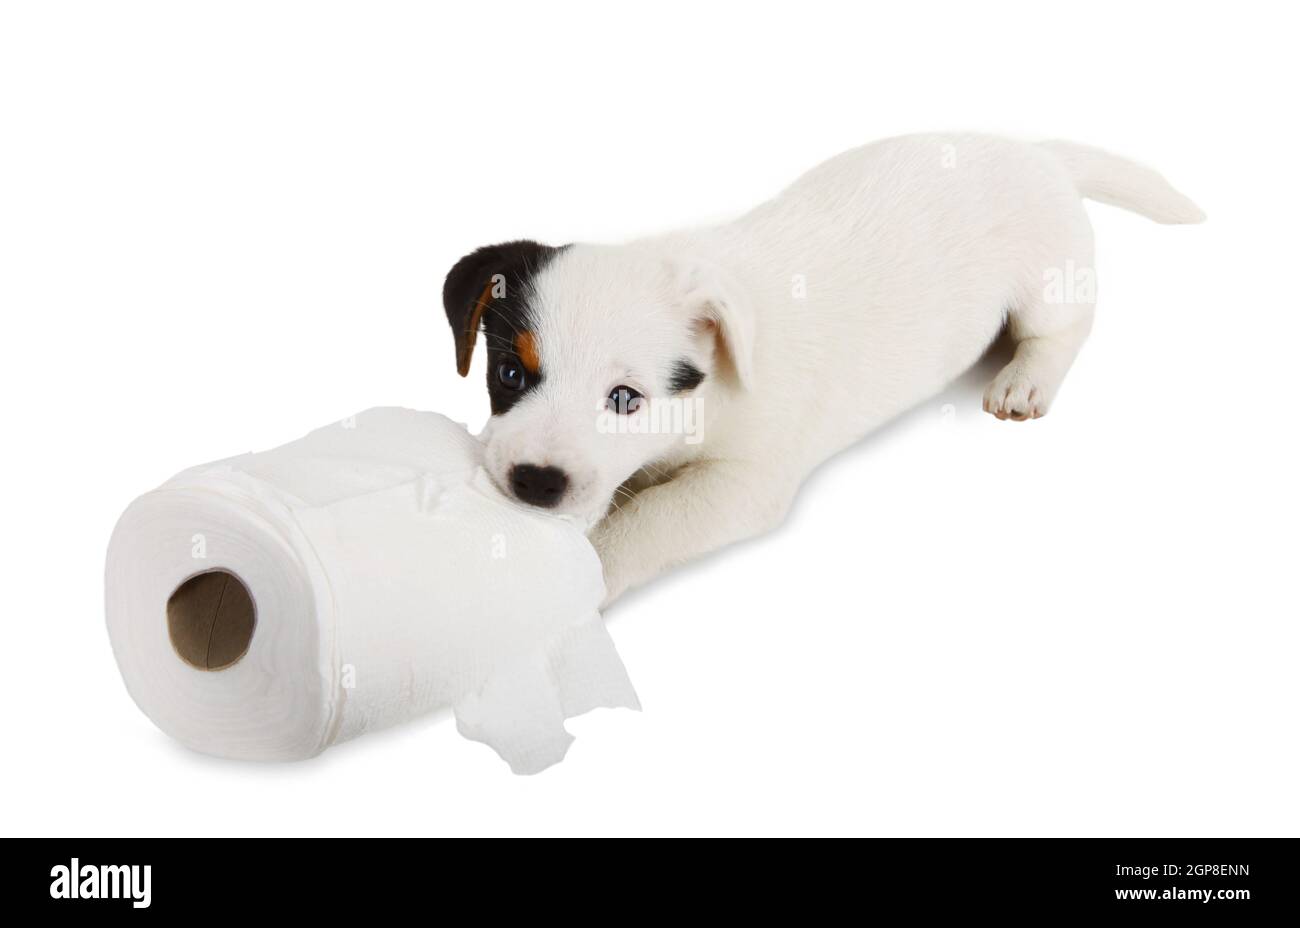 Jack Russell puppy caught playing in toilet paper Stock Photo